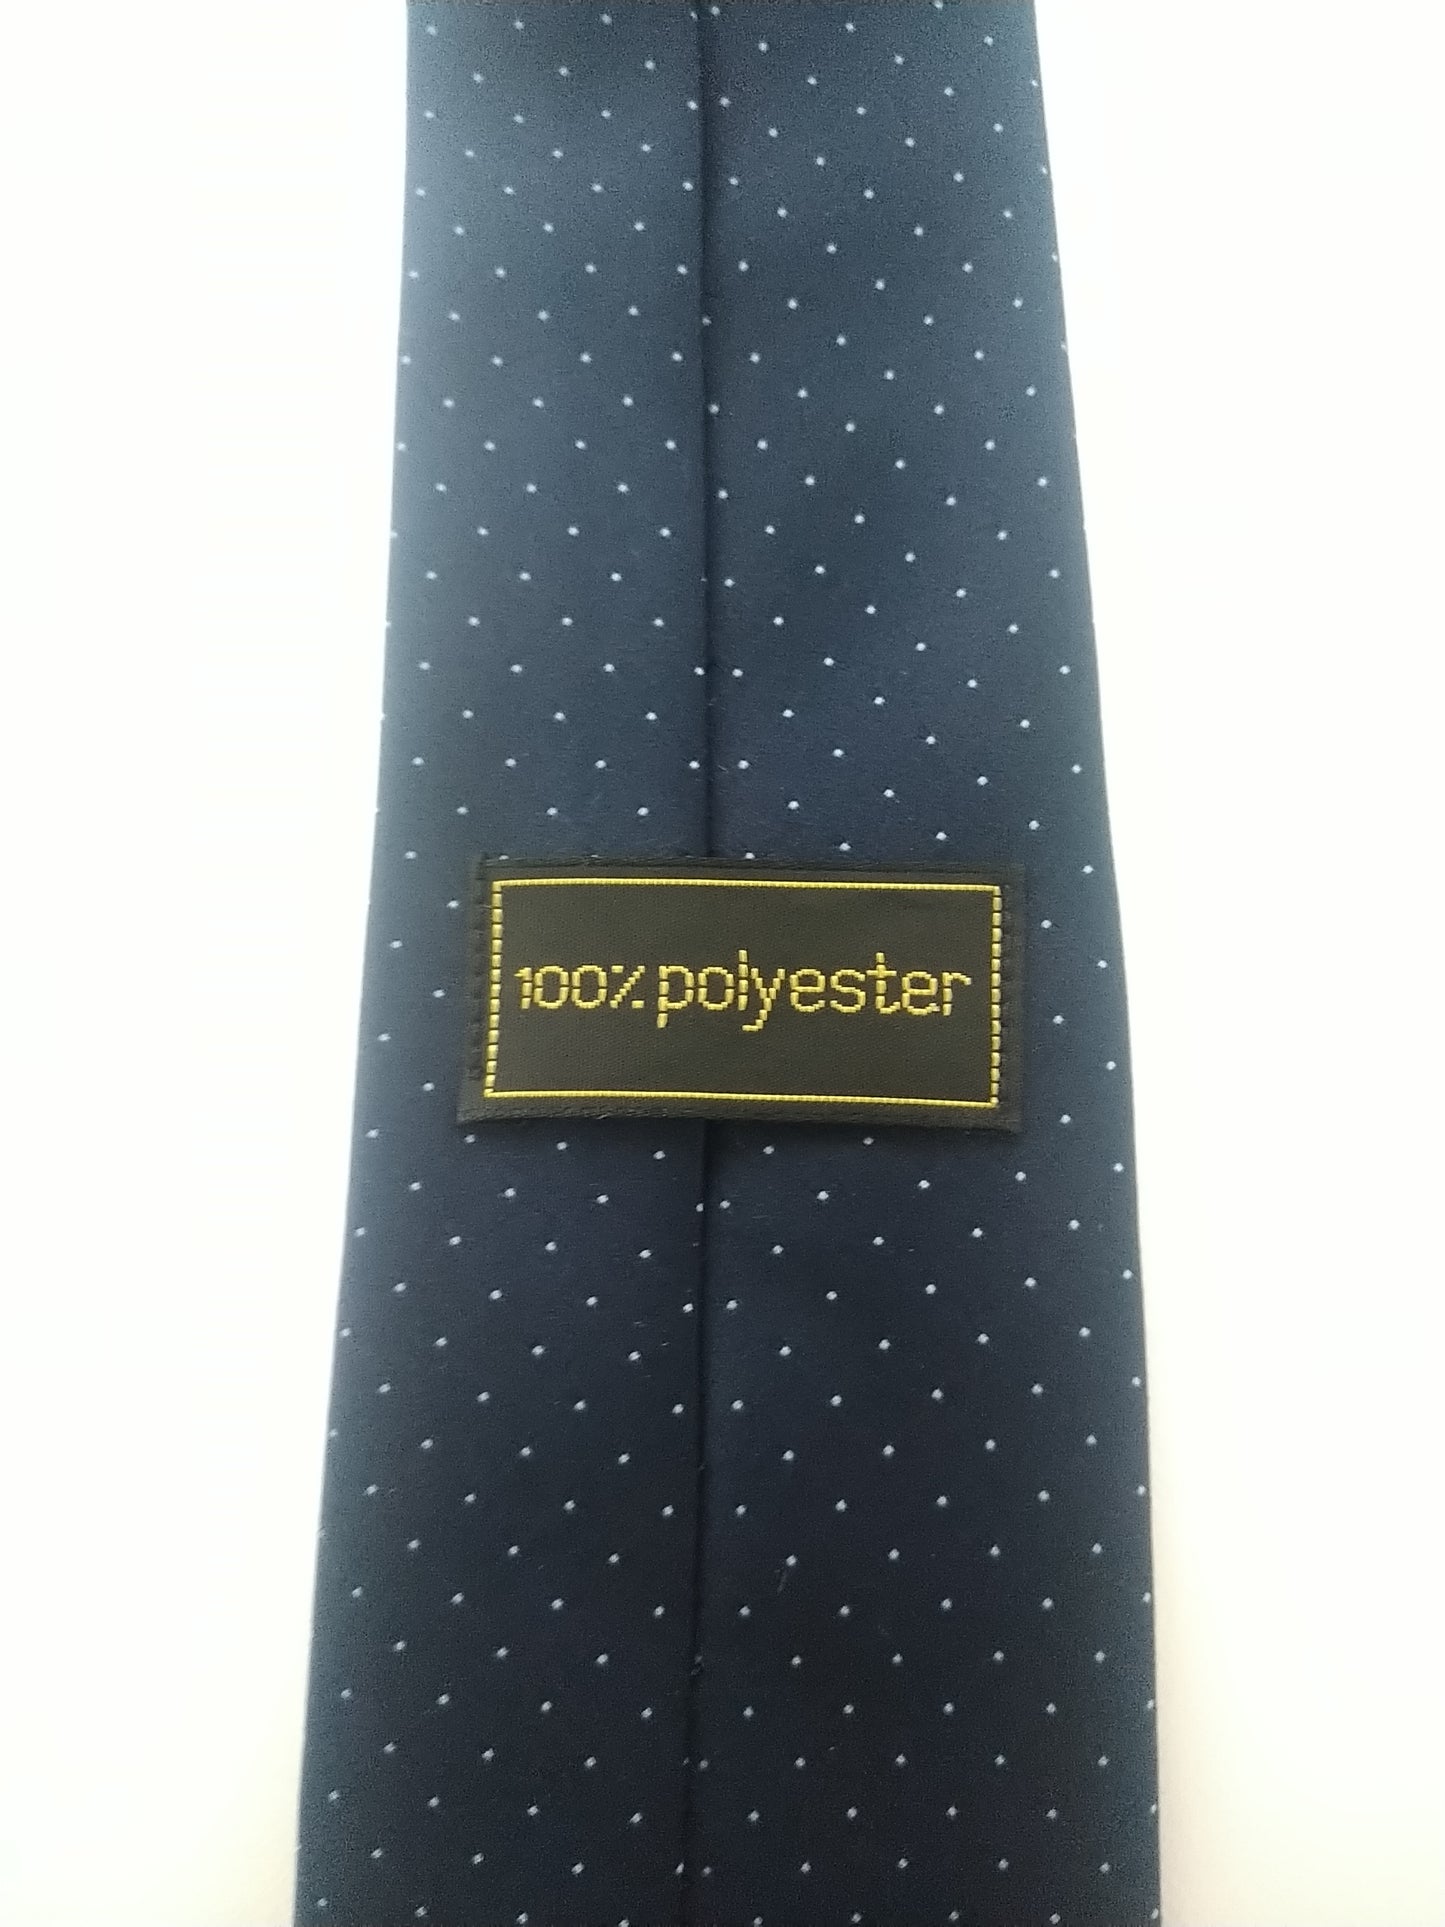 Vintage 'book' tie. Blue white dots. Polyester.